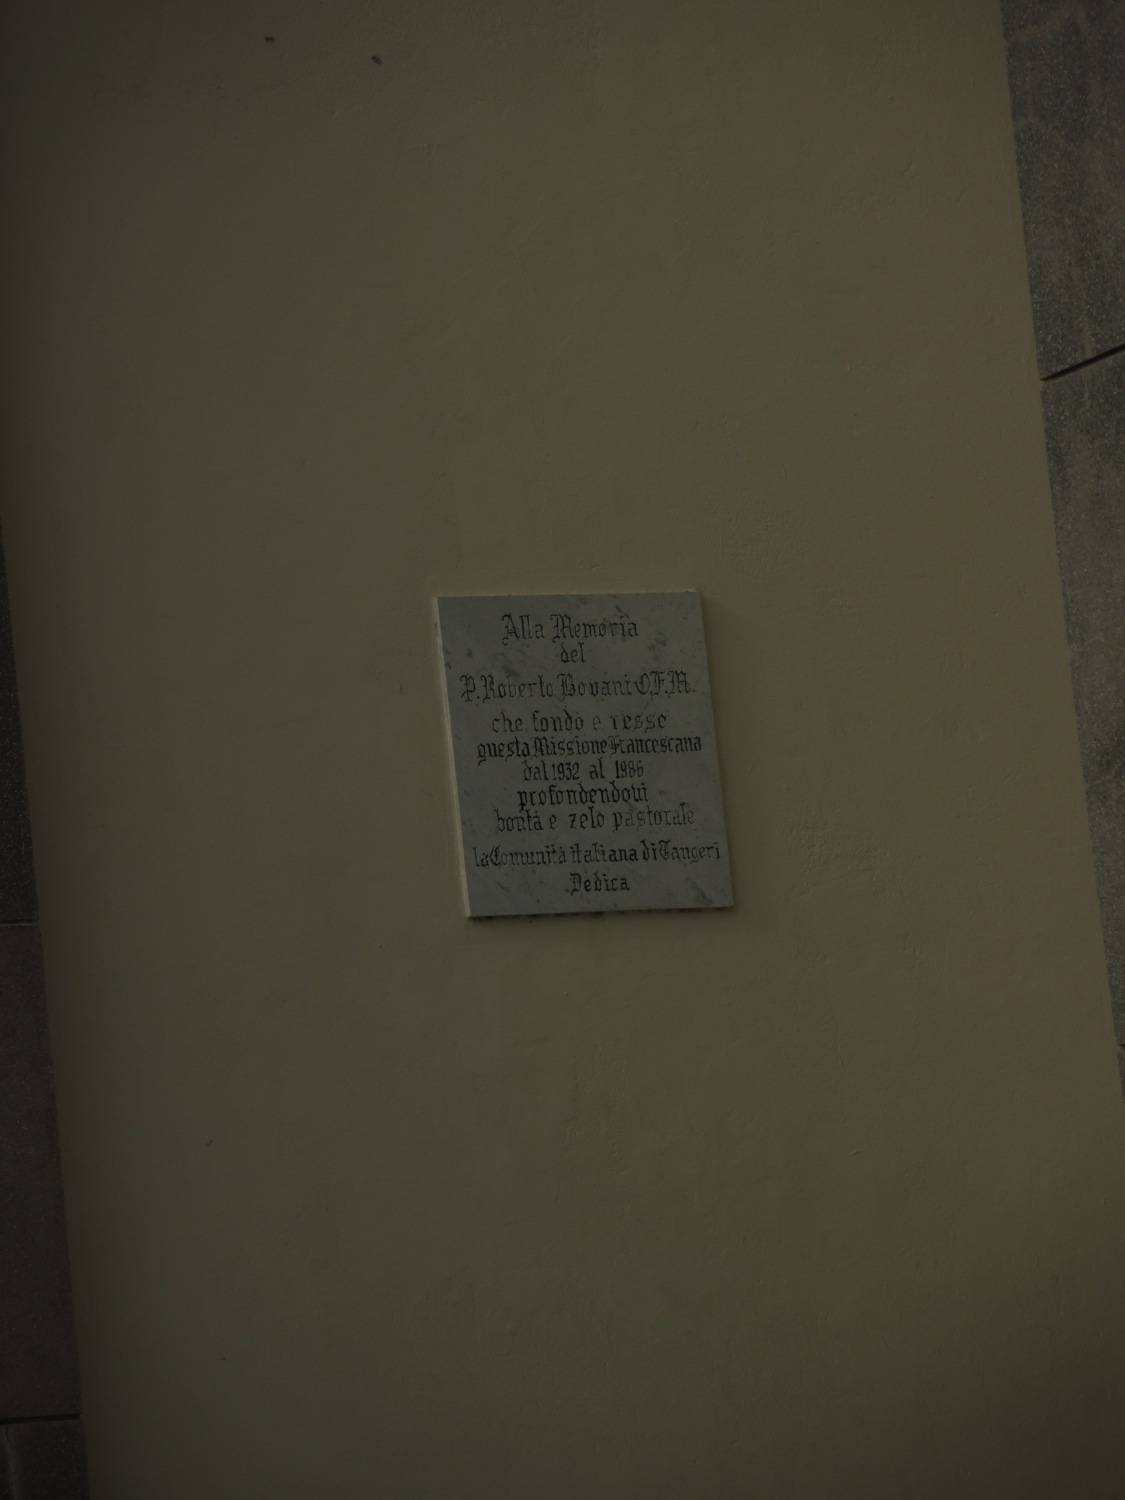 Detail view, commemorative plaque inside the main entry